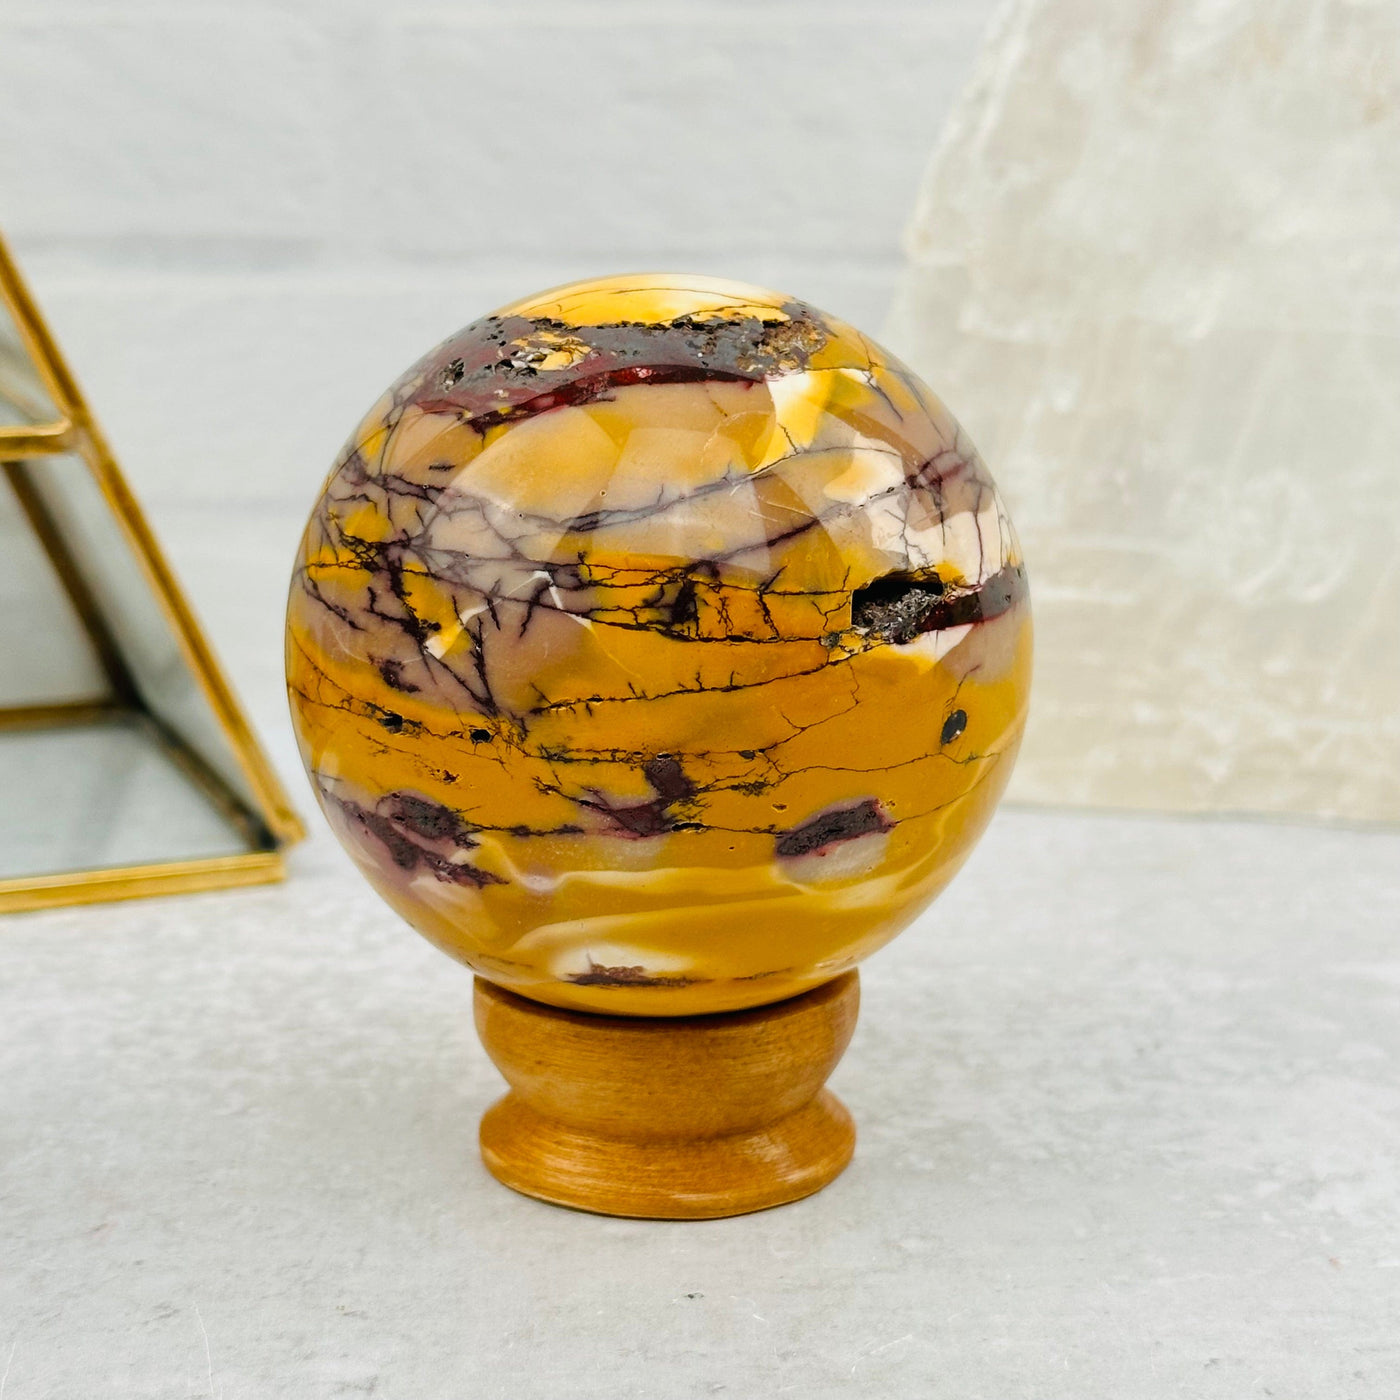 Mookaite Polished Sphere displayed as home decor